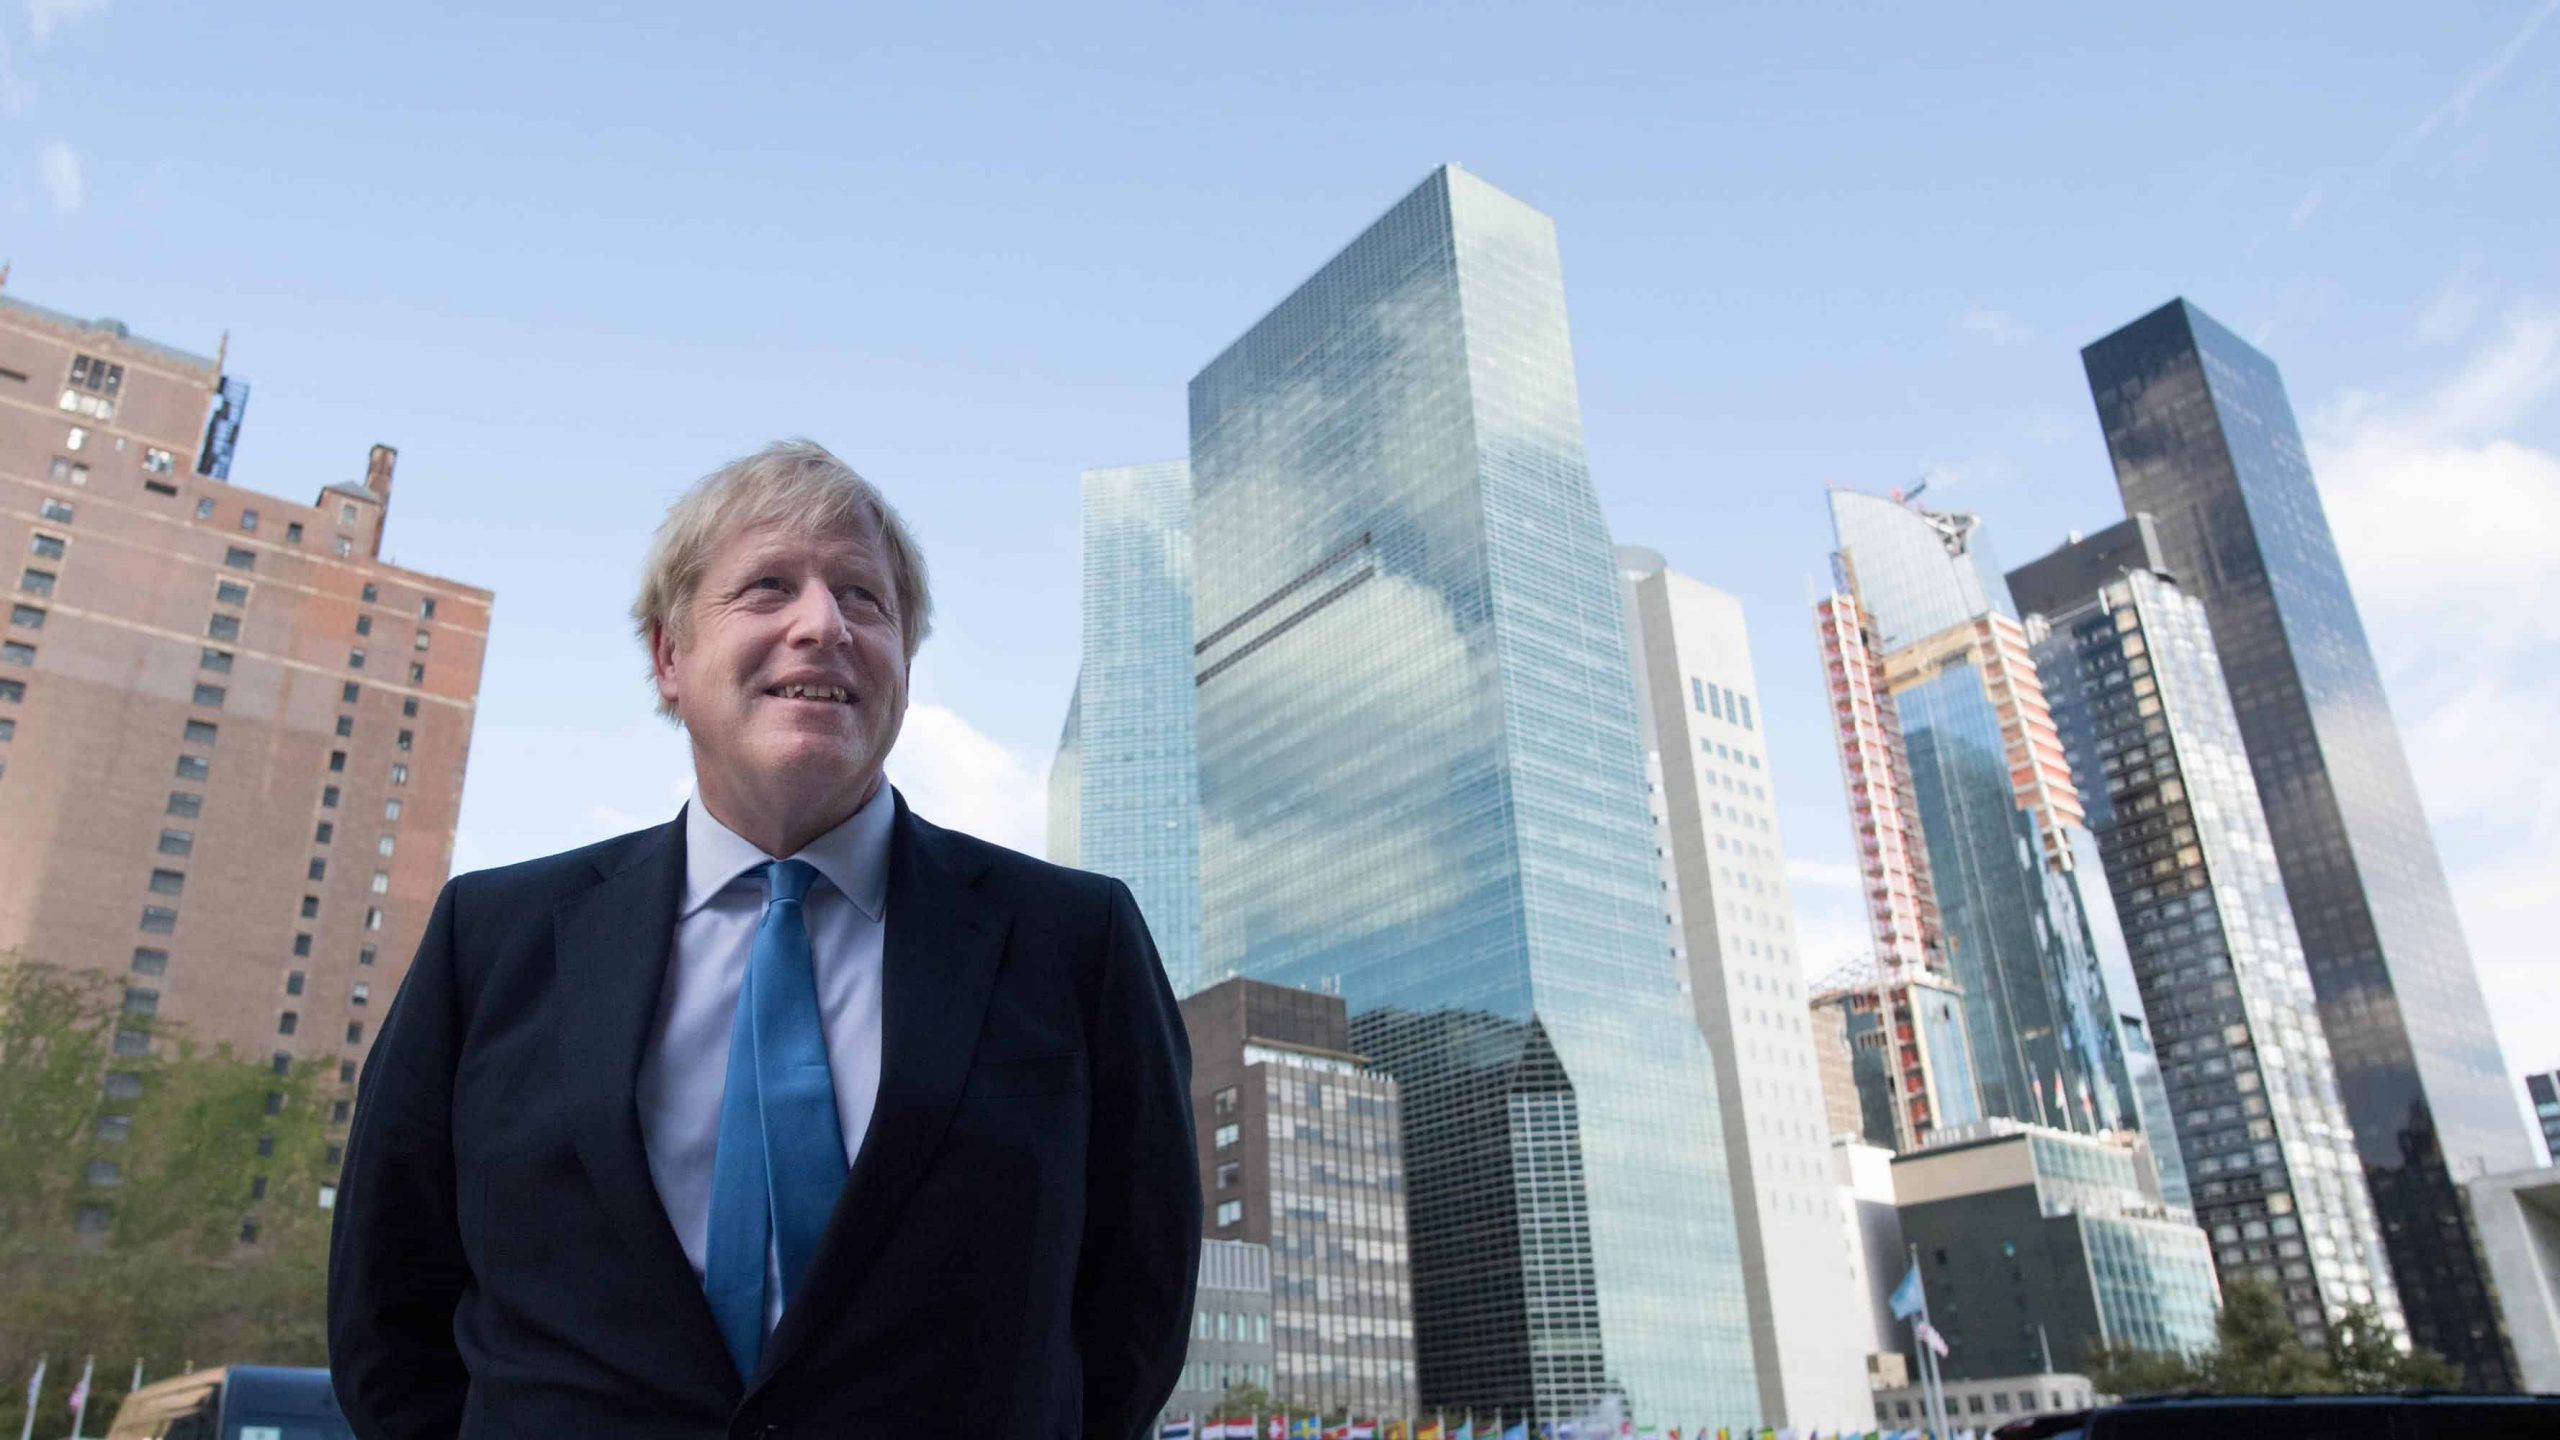 Boris Johnson seemed affronted when criticised as a schoolboy, letter reveals